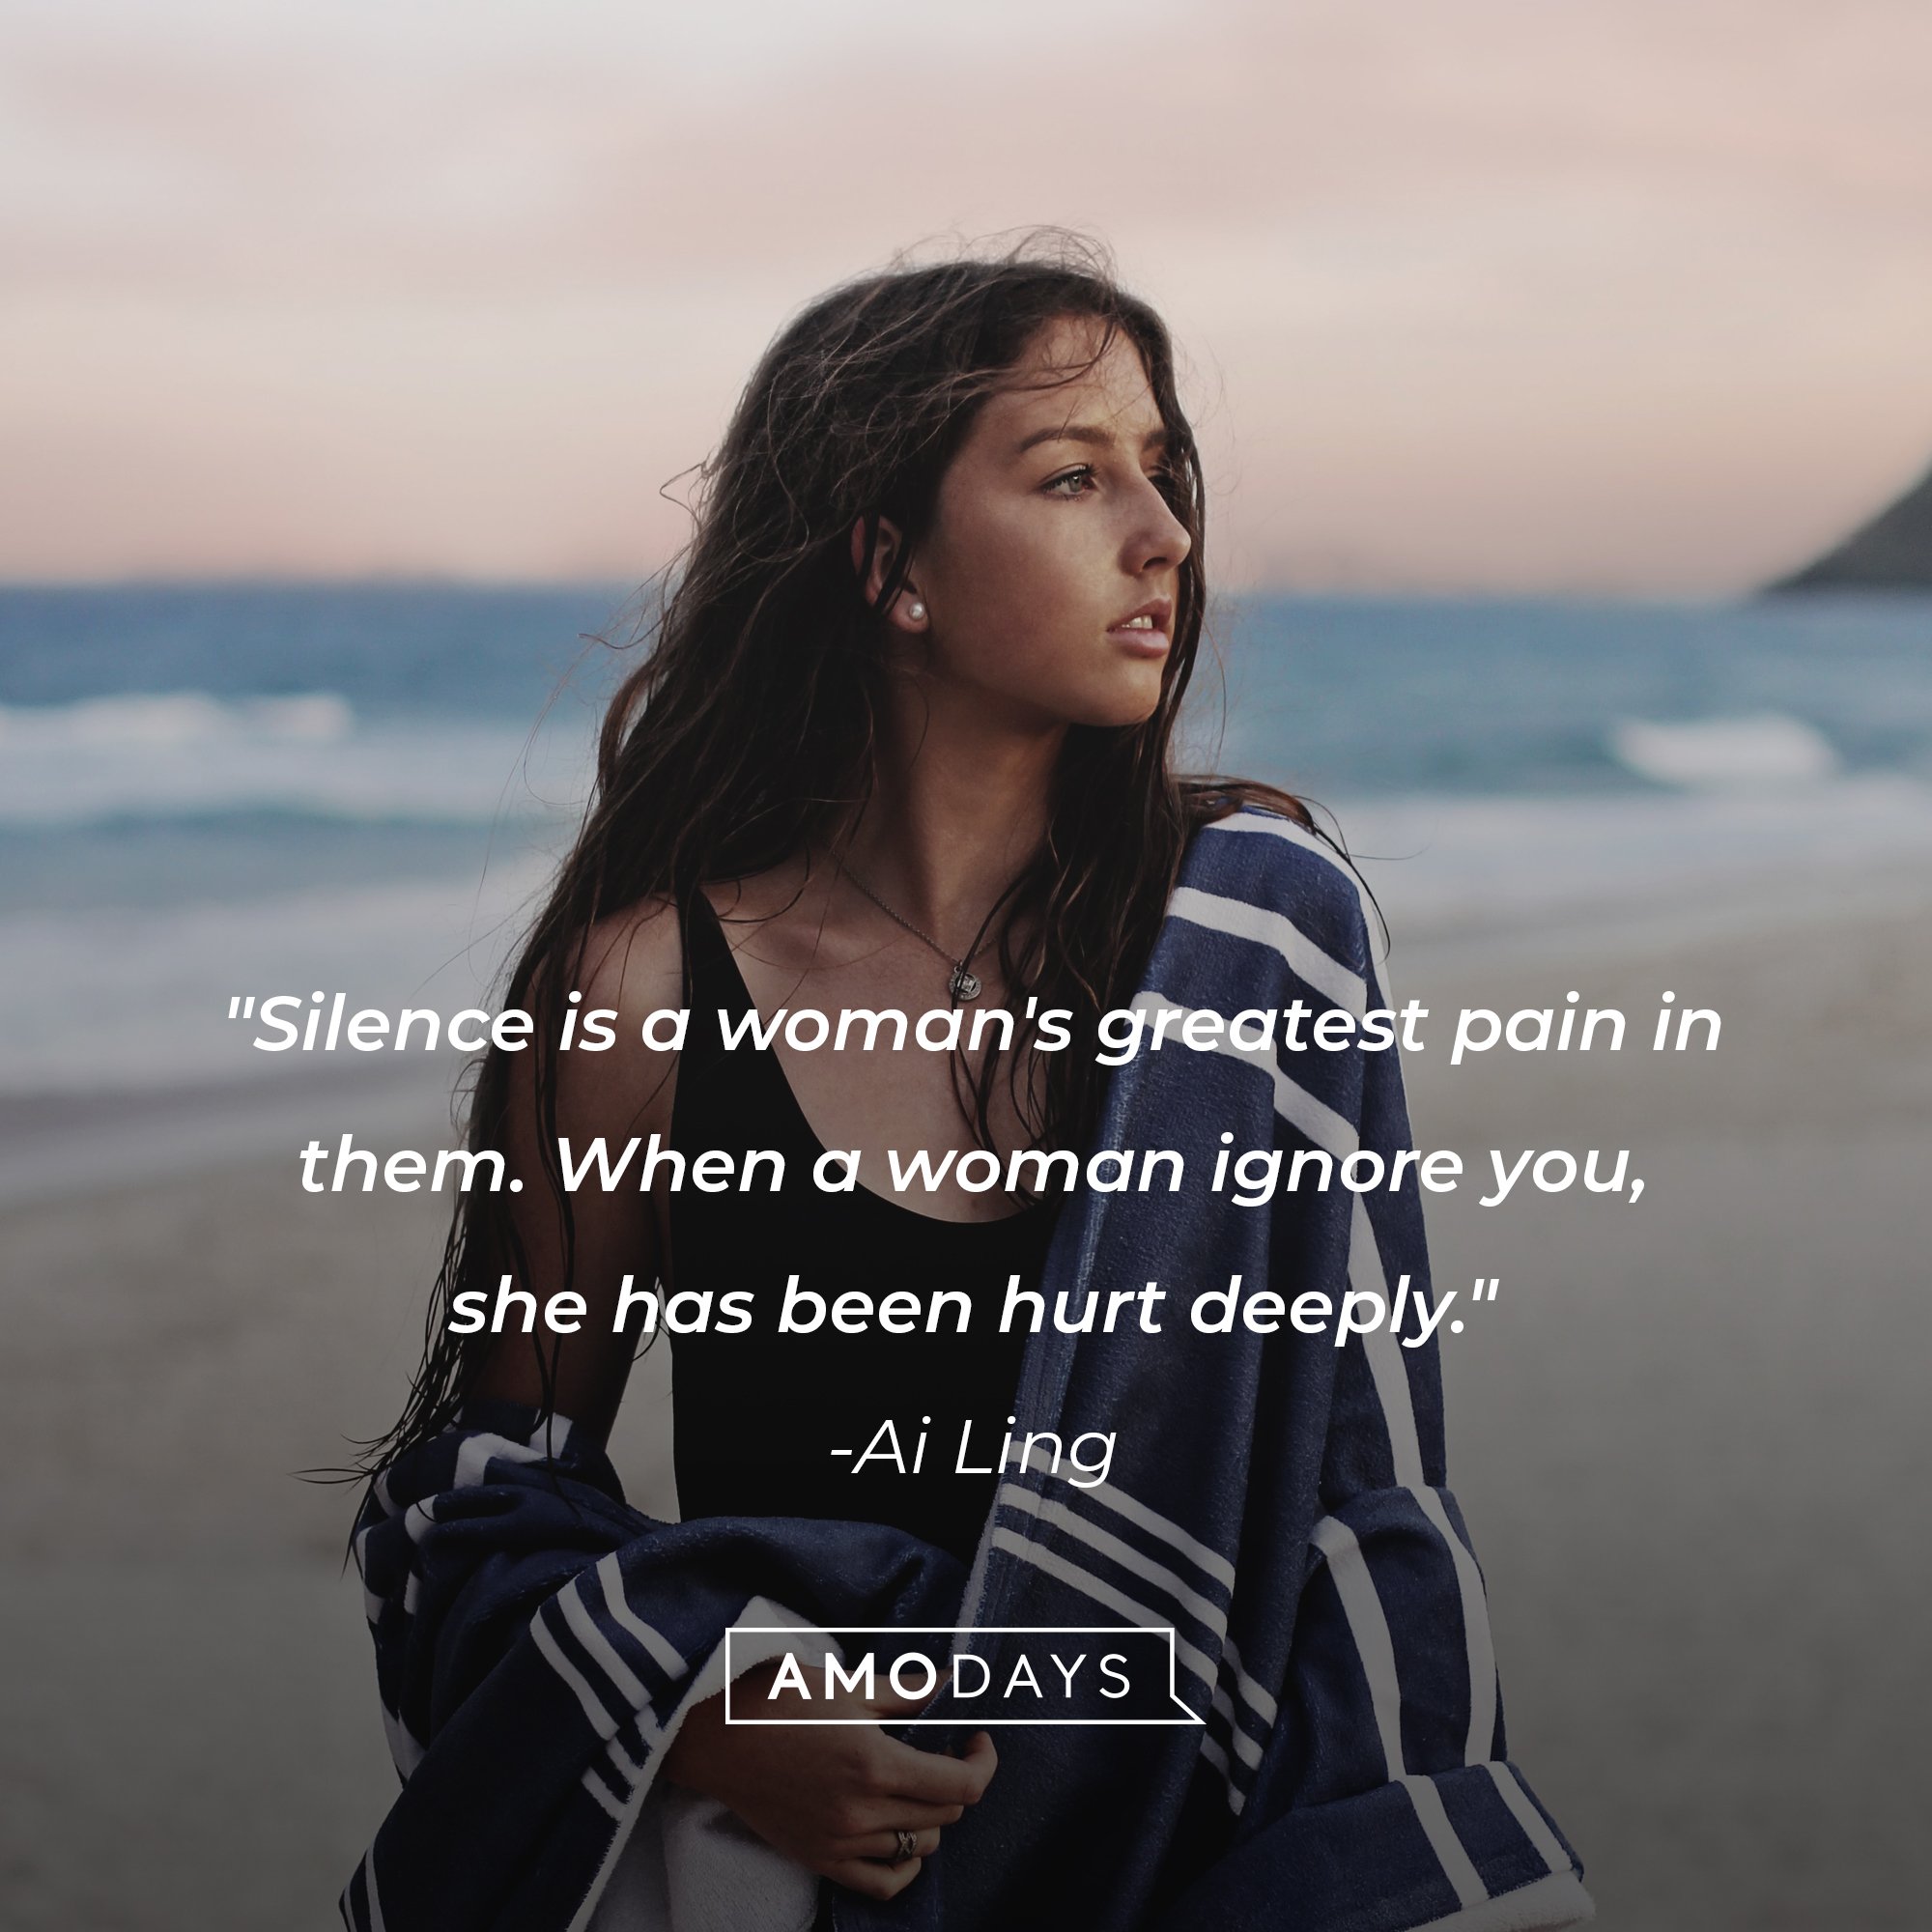 Ai Ling’s quote: "Silence is a woman's greatest pain in them. When a woman ignore you, she has been hurt deeply." | Image: AmoDays